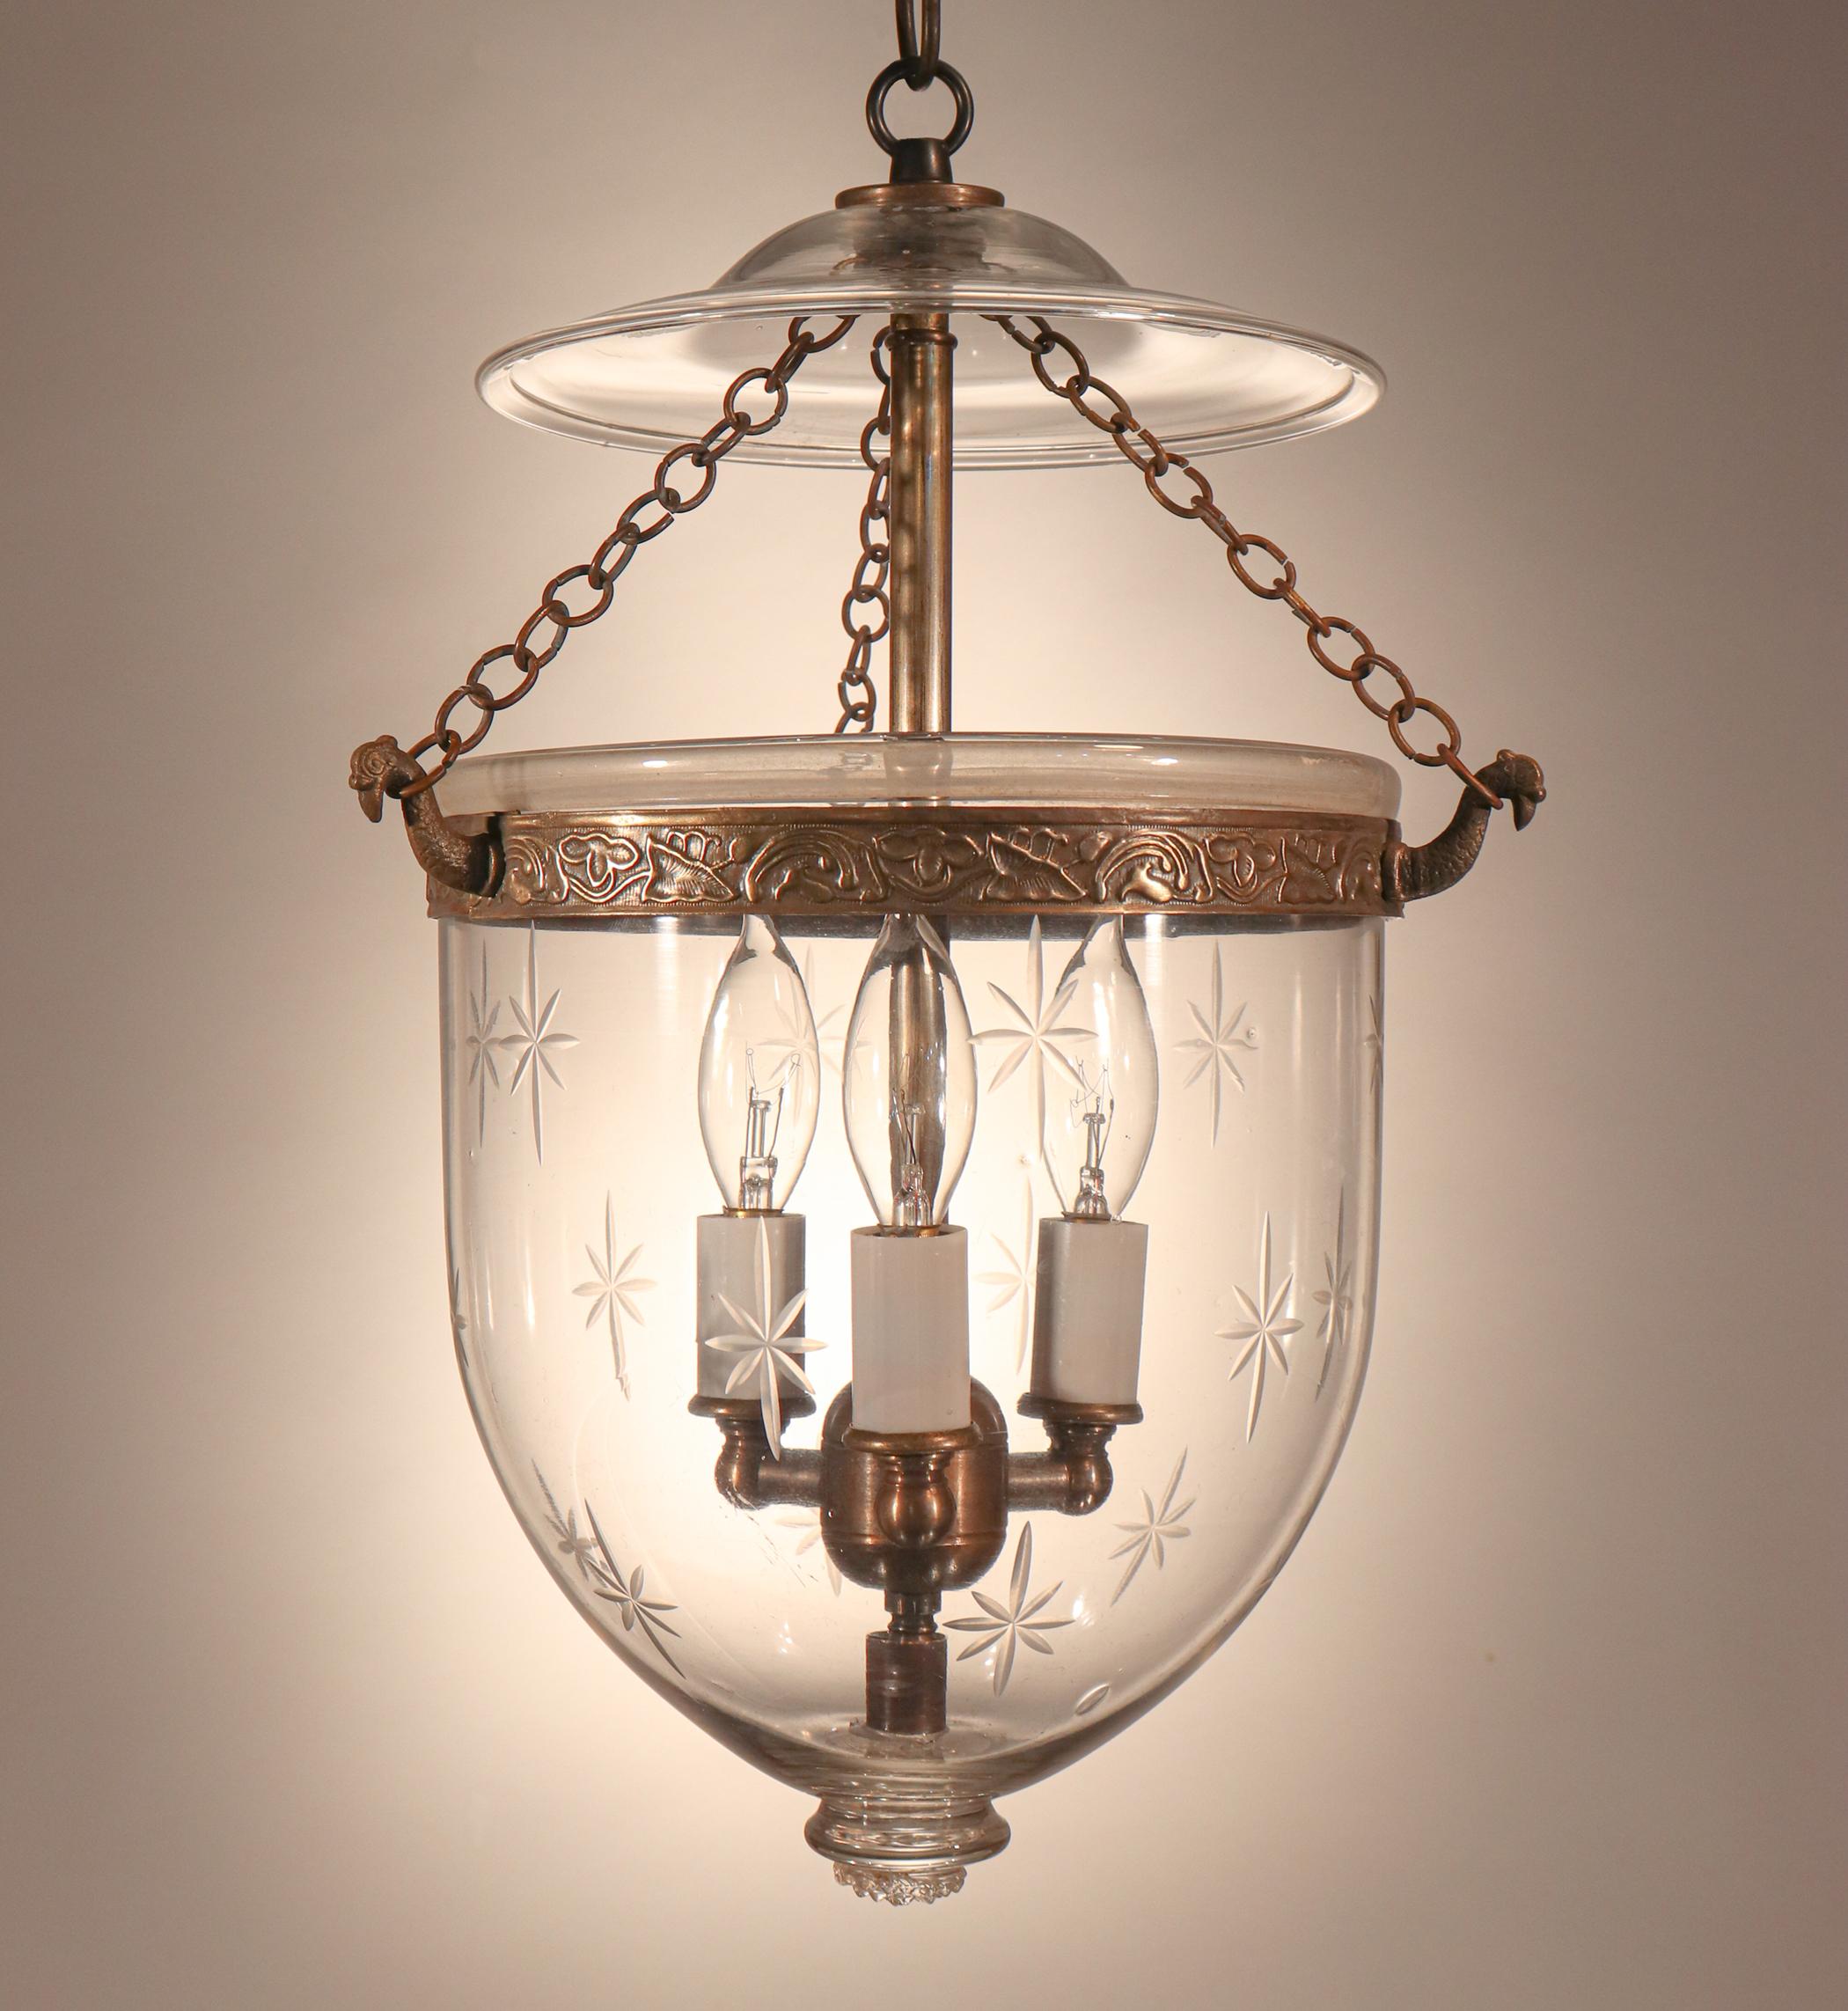 A charming, petite English bell jar lantern with etched stars. Perfect for small spaces and/or low ceiling heights, the pendant features several desirable air bubbles in the hand blown glass, as well as an attractive embossed brass band that was